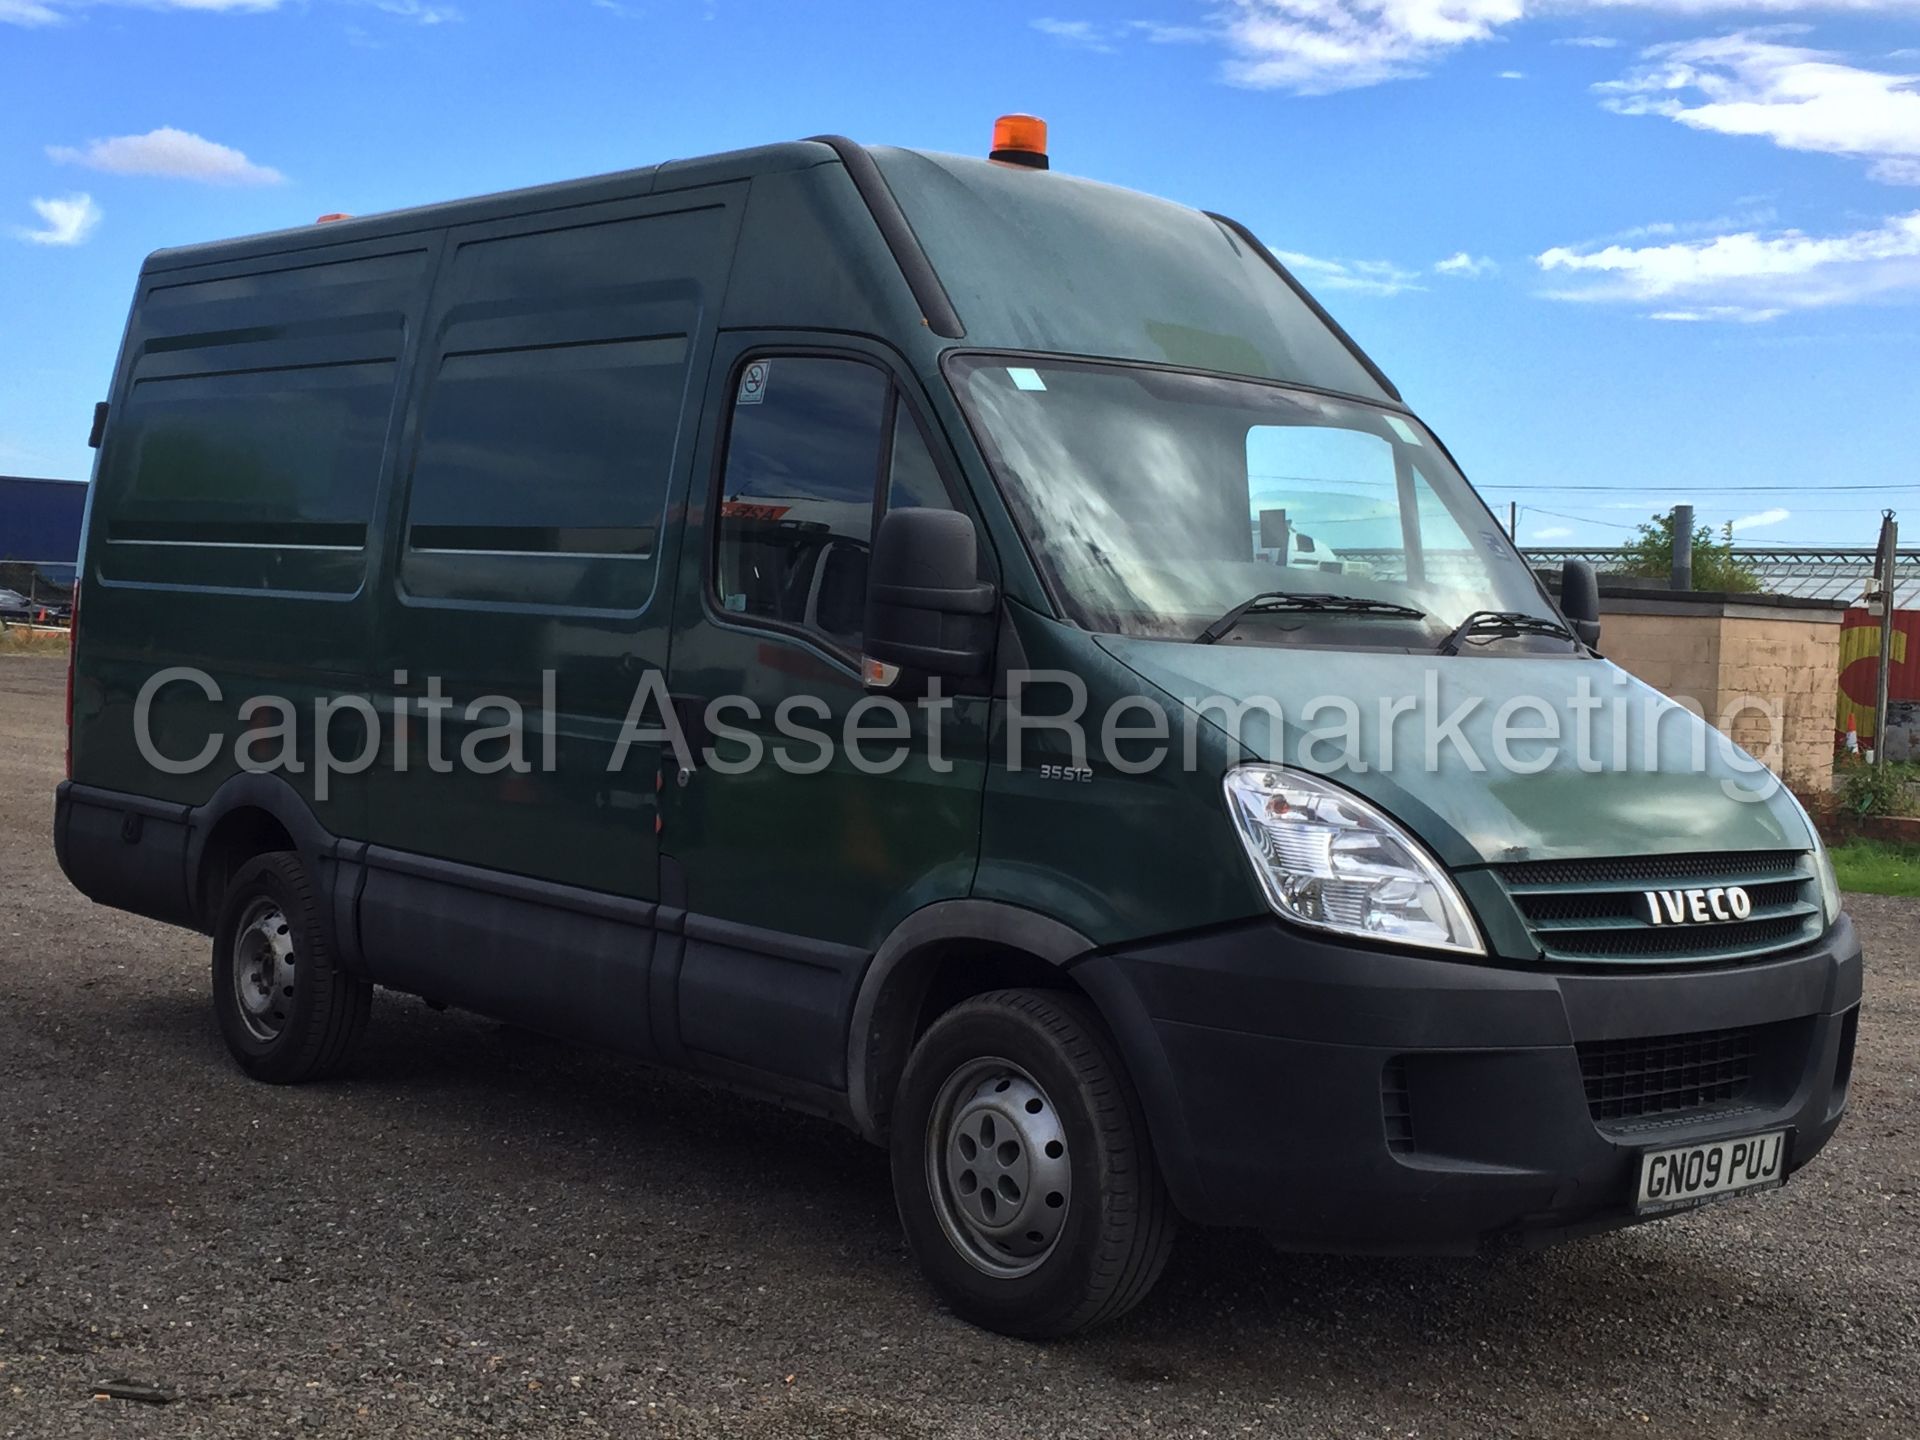 (On Sale) IVECO DAILY 35S12 'MWB HI-ROOF' (2009 - 09 REG) '2.3 DIESEL' (1 COMPANY OWNER FROM NEW)